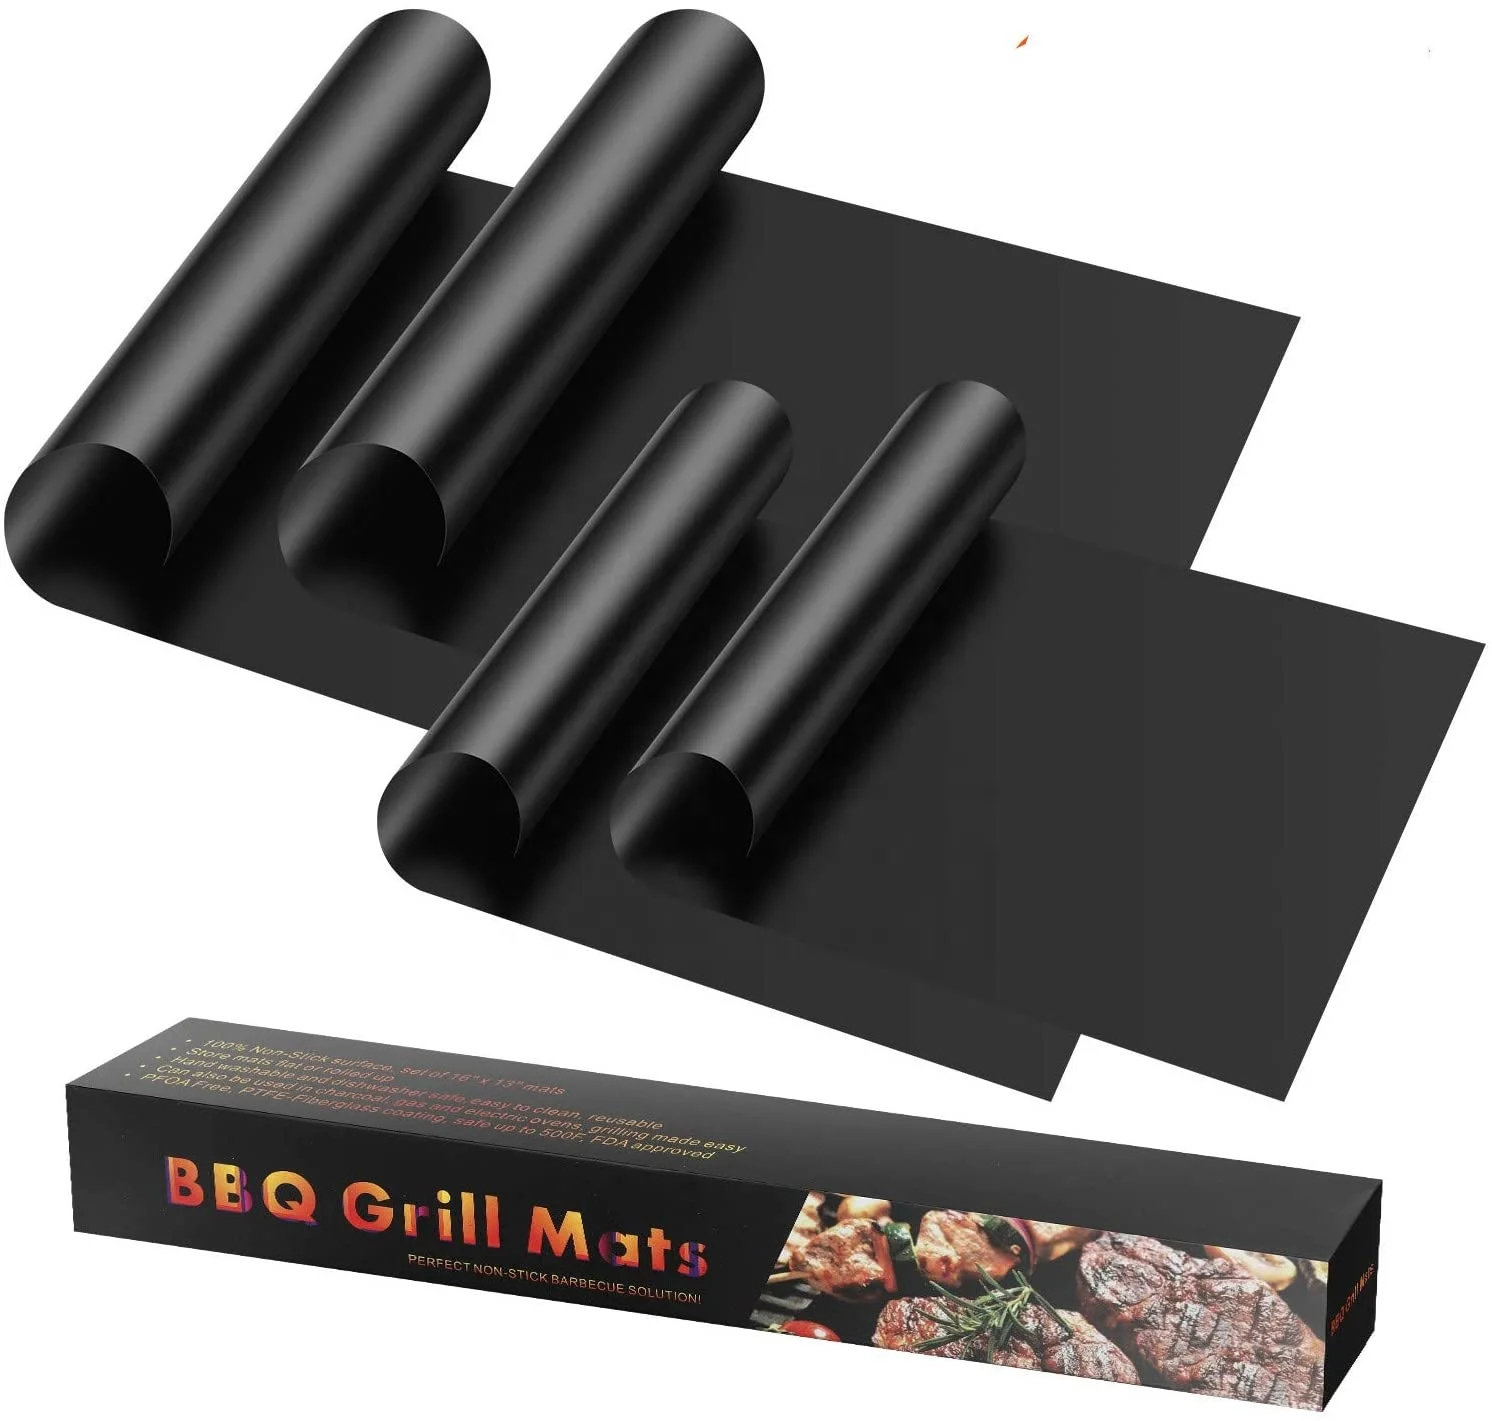 

Non-Stick Cooking Mat Reusable PTFE bbq grill mat Heat Resistant Barbecue Baking Mat for Electric Grill Gas Charcoal BBQ, Black color is available